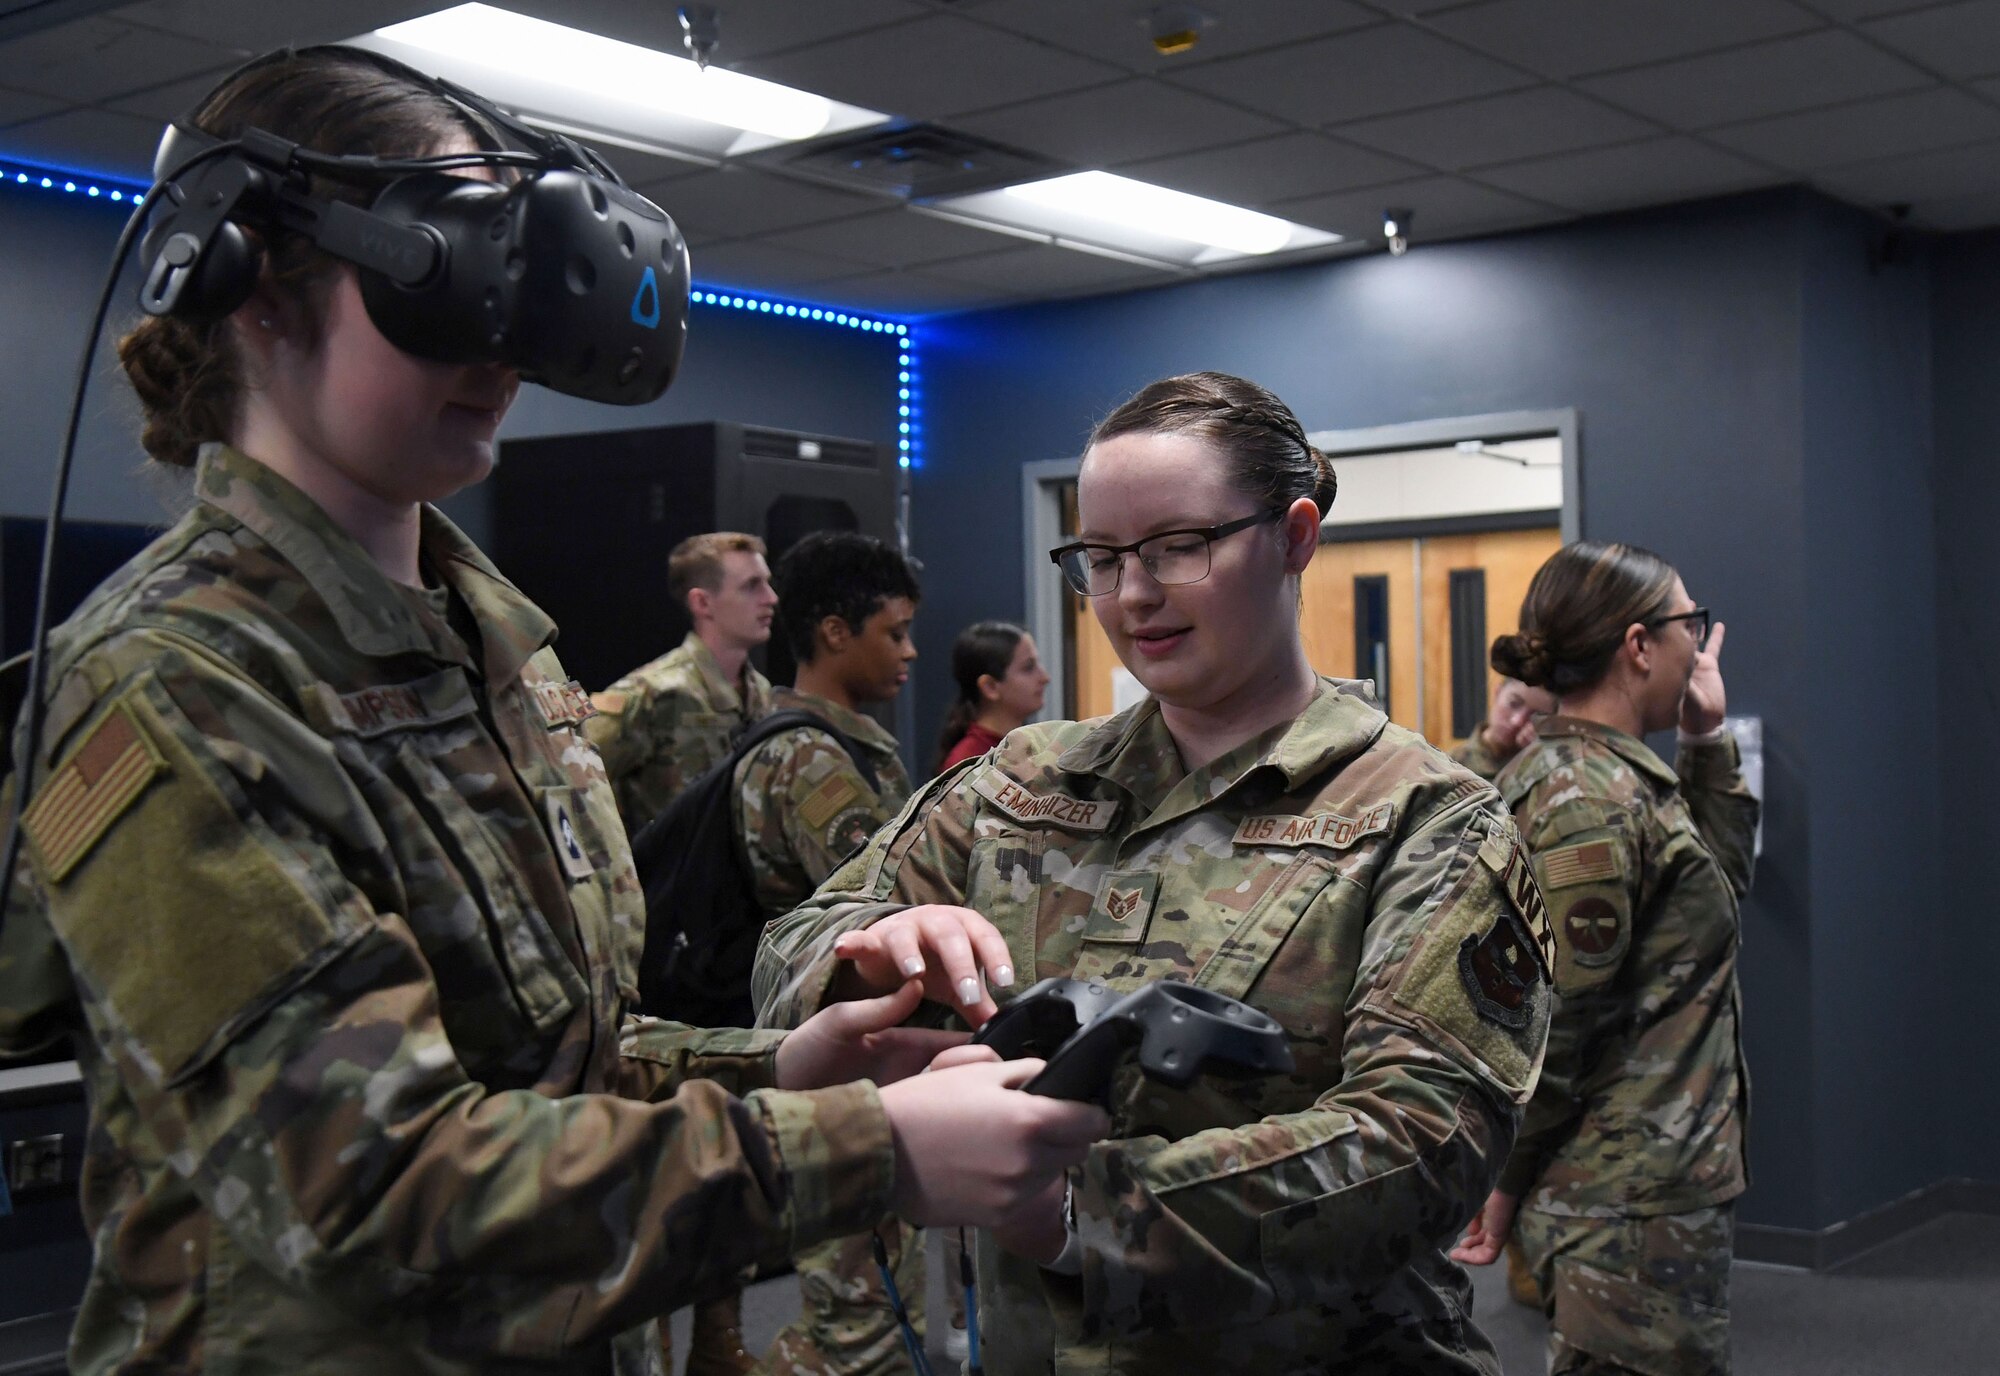 U.S. Air Force Staff Sgt. Brystal Eminhizer, 335th Training Squadron instructor, assists Kayla Simpson, Troy University Air Force ROTC cadet, with a weather virtual reality demonstration during Pathways to Blue inside the Weather Complex at Keesler Air Force Base, Mississippi, April 1, 2023.